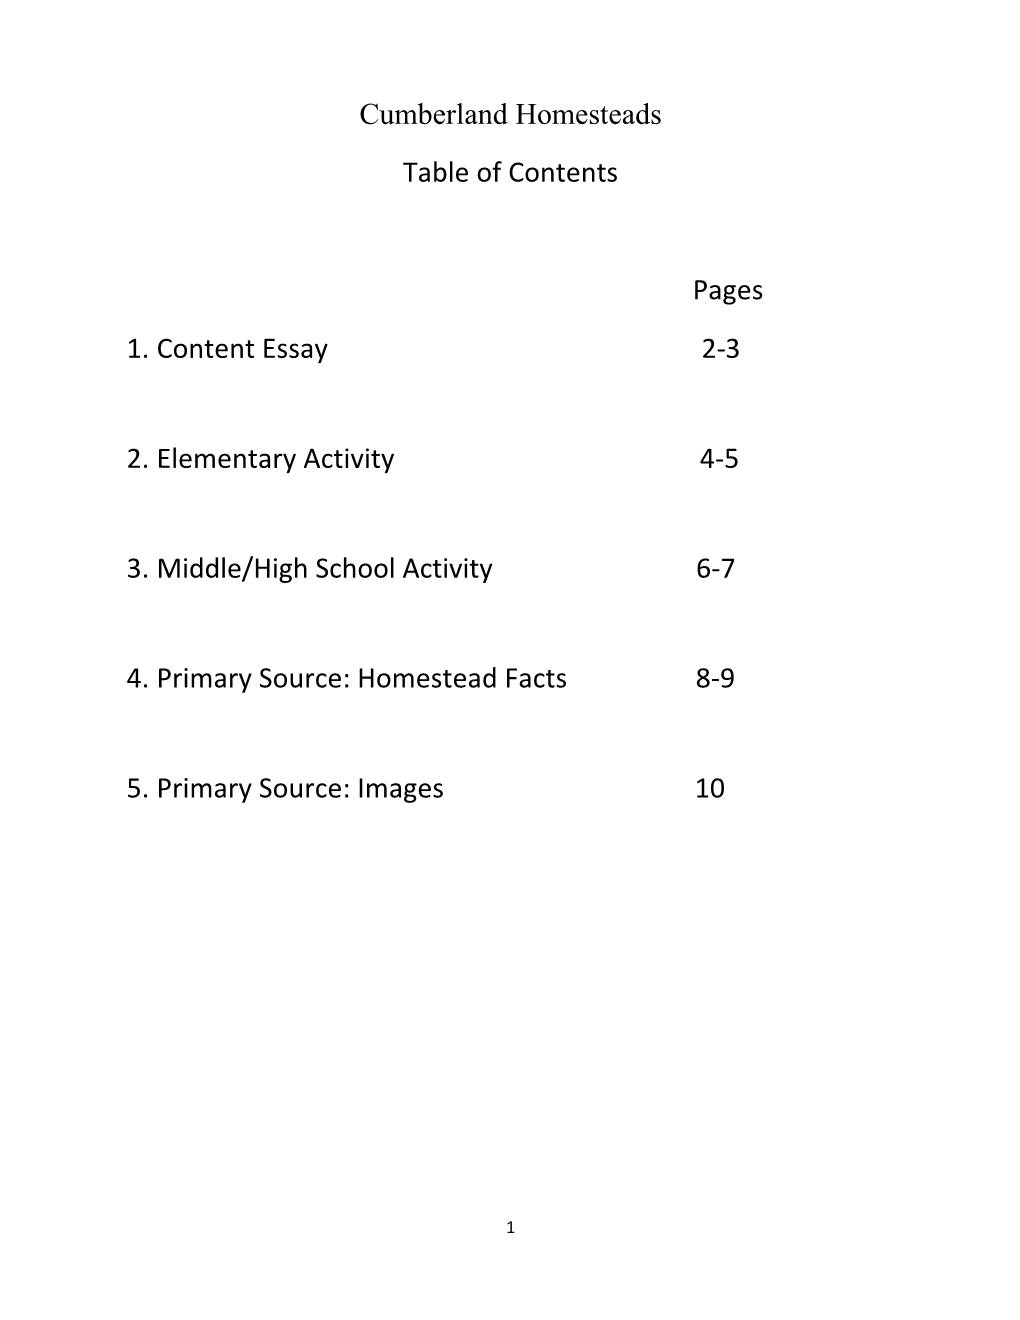 Cumberland Homesteads Table of Contents